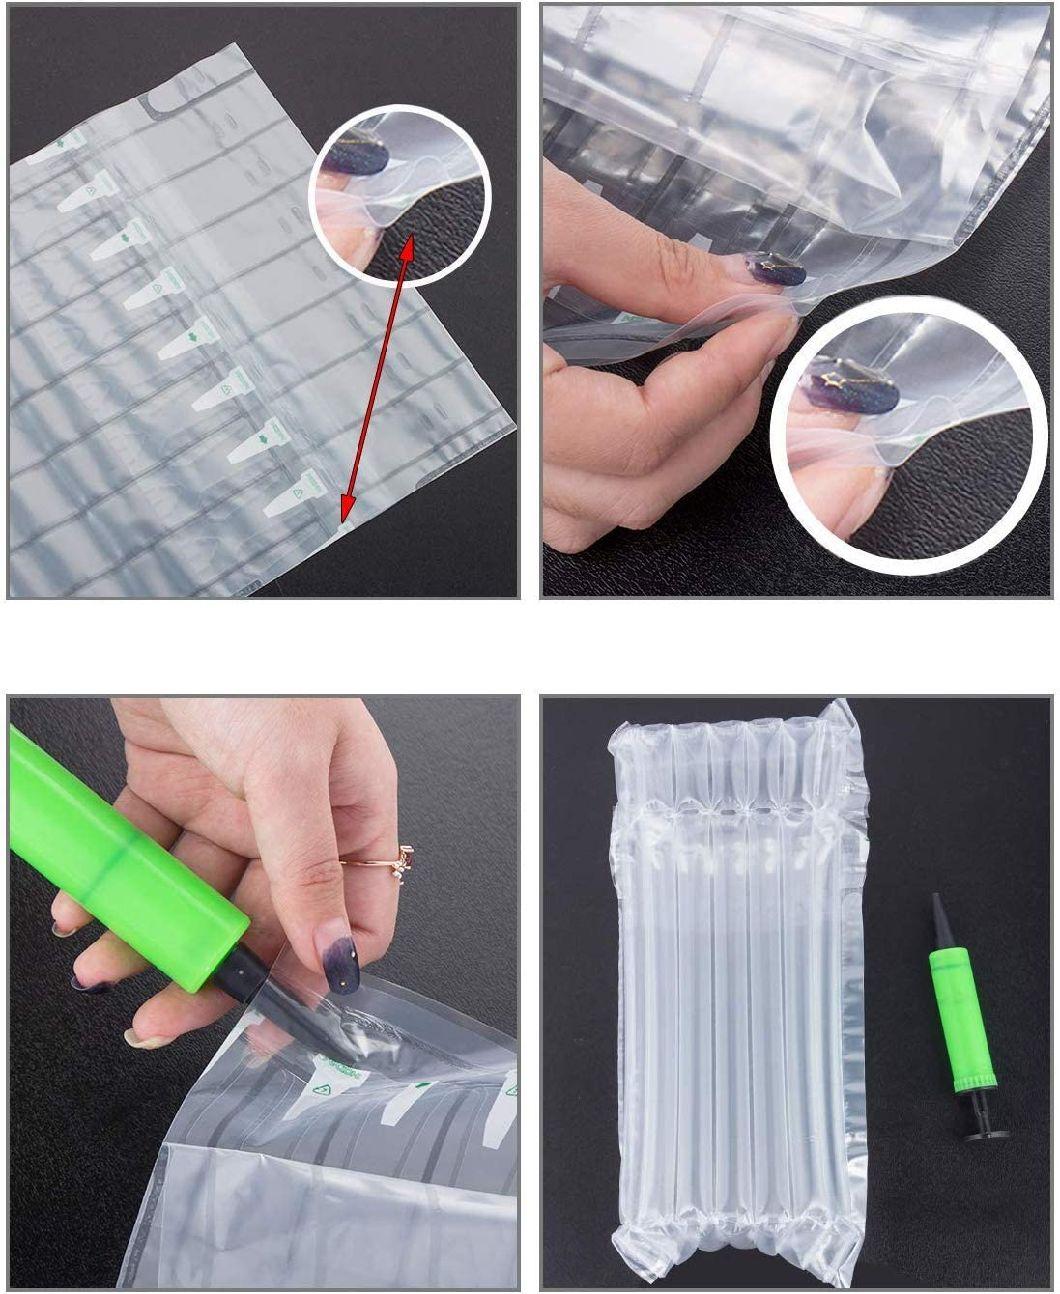 30-110cm Air Column Inflatable Bubble Bag Shockproof Logistics Buffer Fragile Bale Cushion Packaging Roll Film Protection Mailer